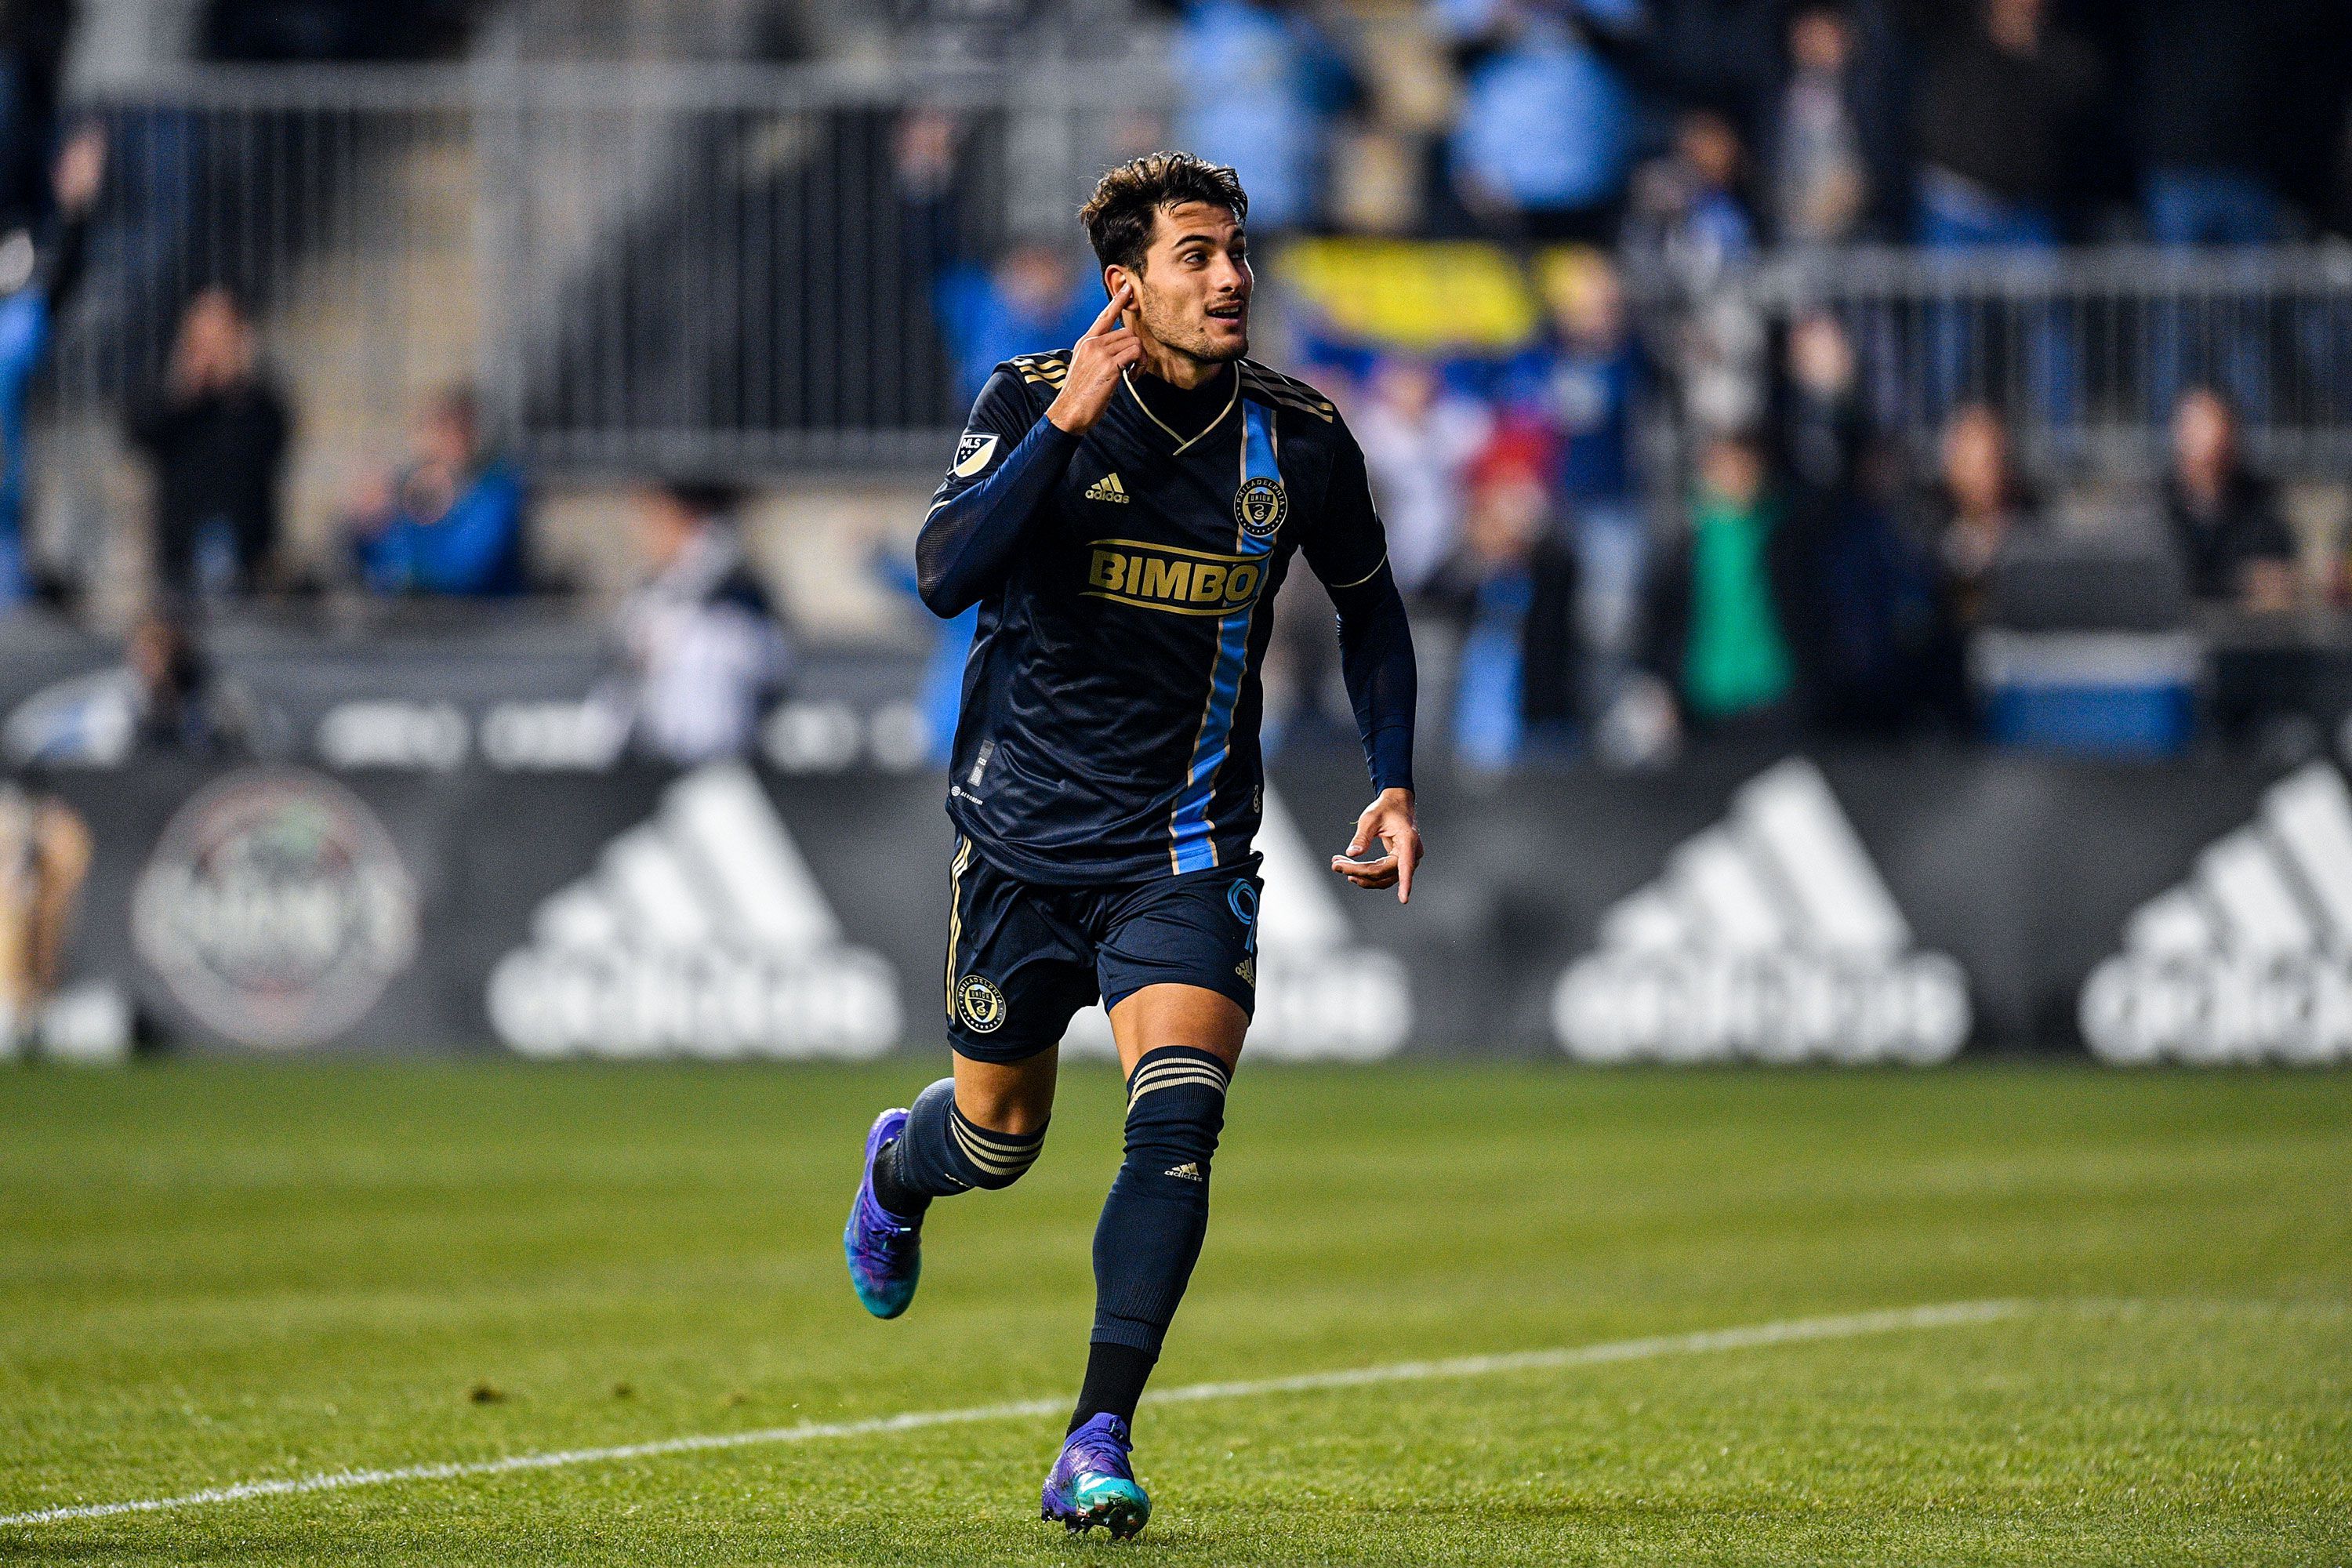 Union make quick work of expansion Charlotte, 2-0